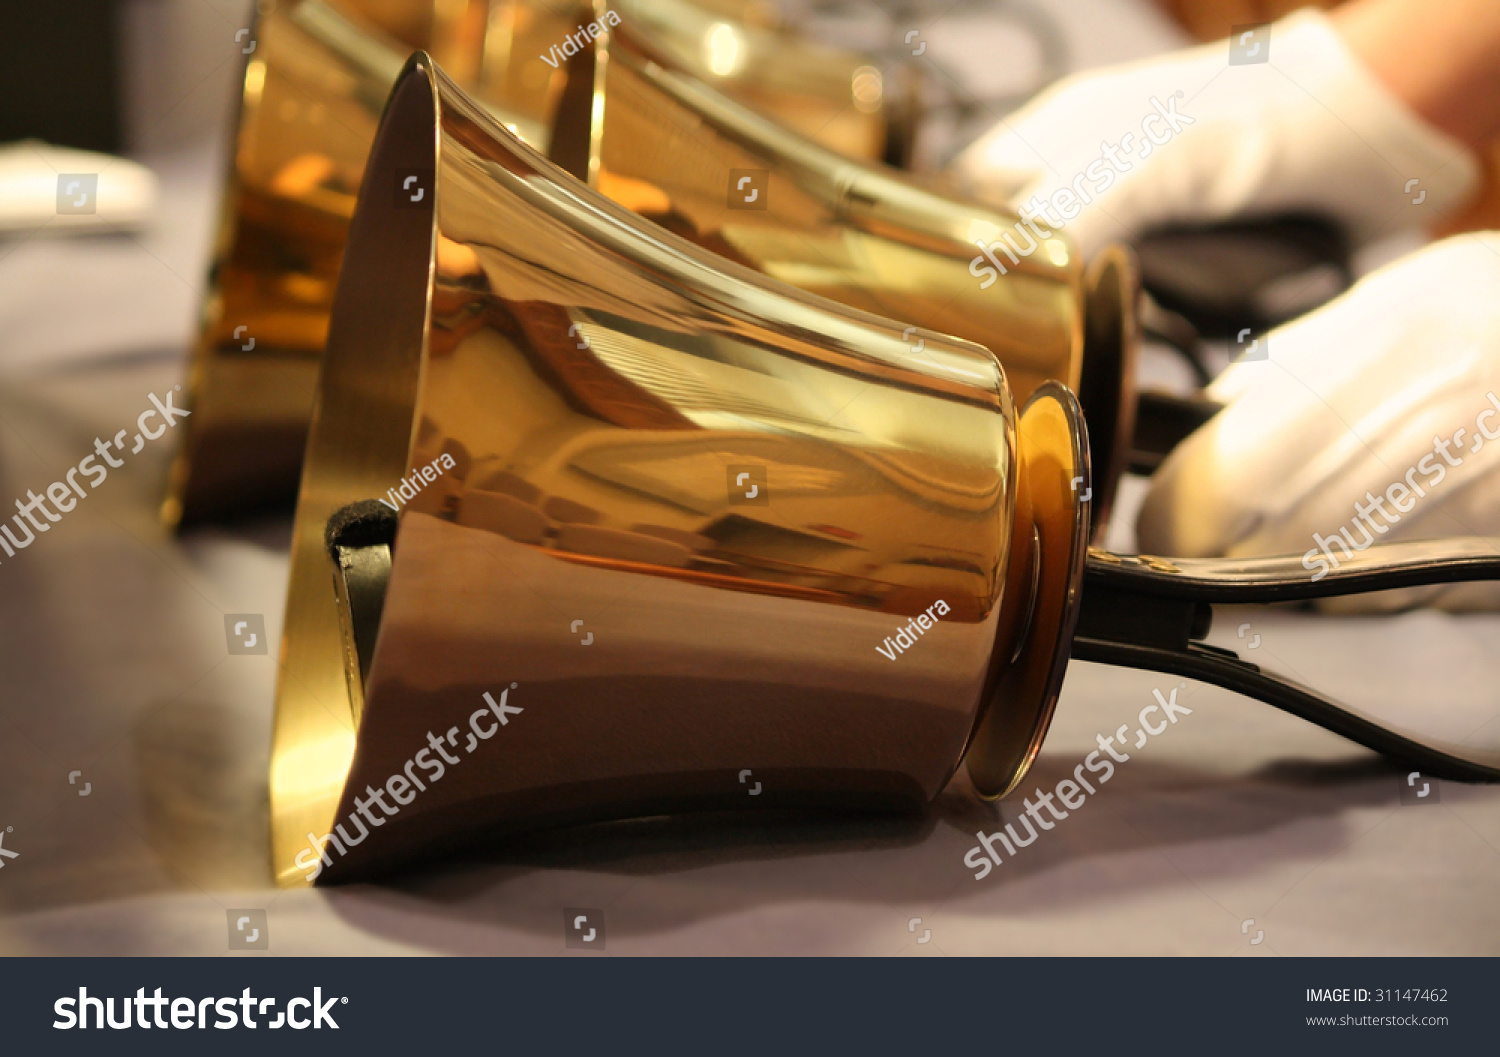 Handbells on table with gloved hands ready to perform #31147462